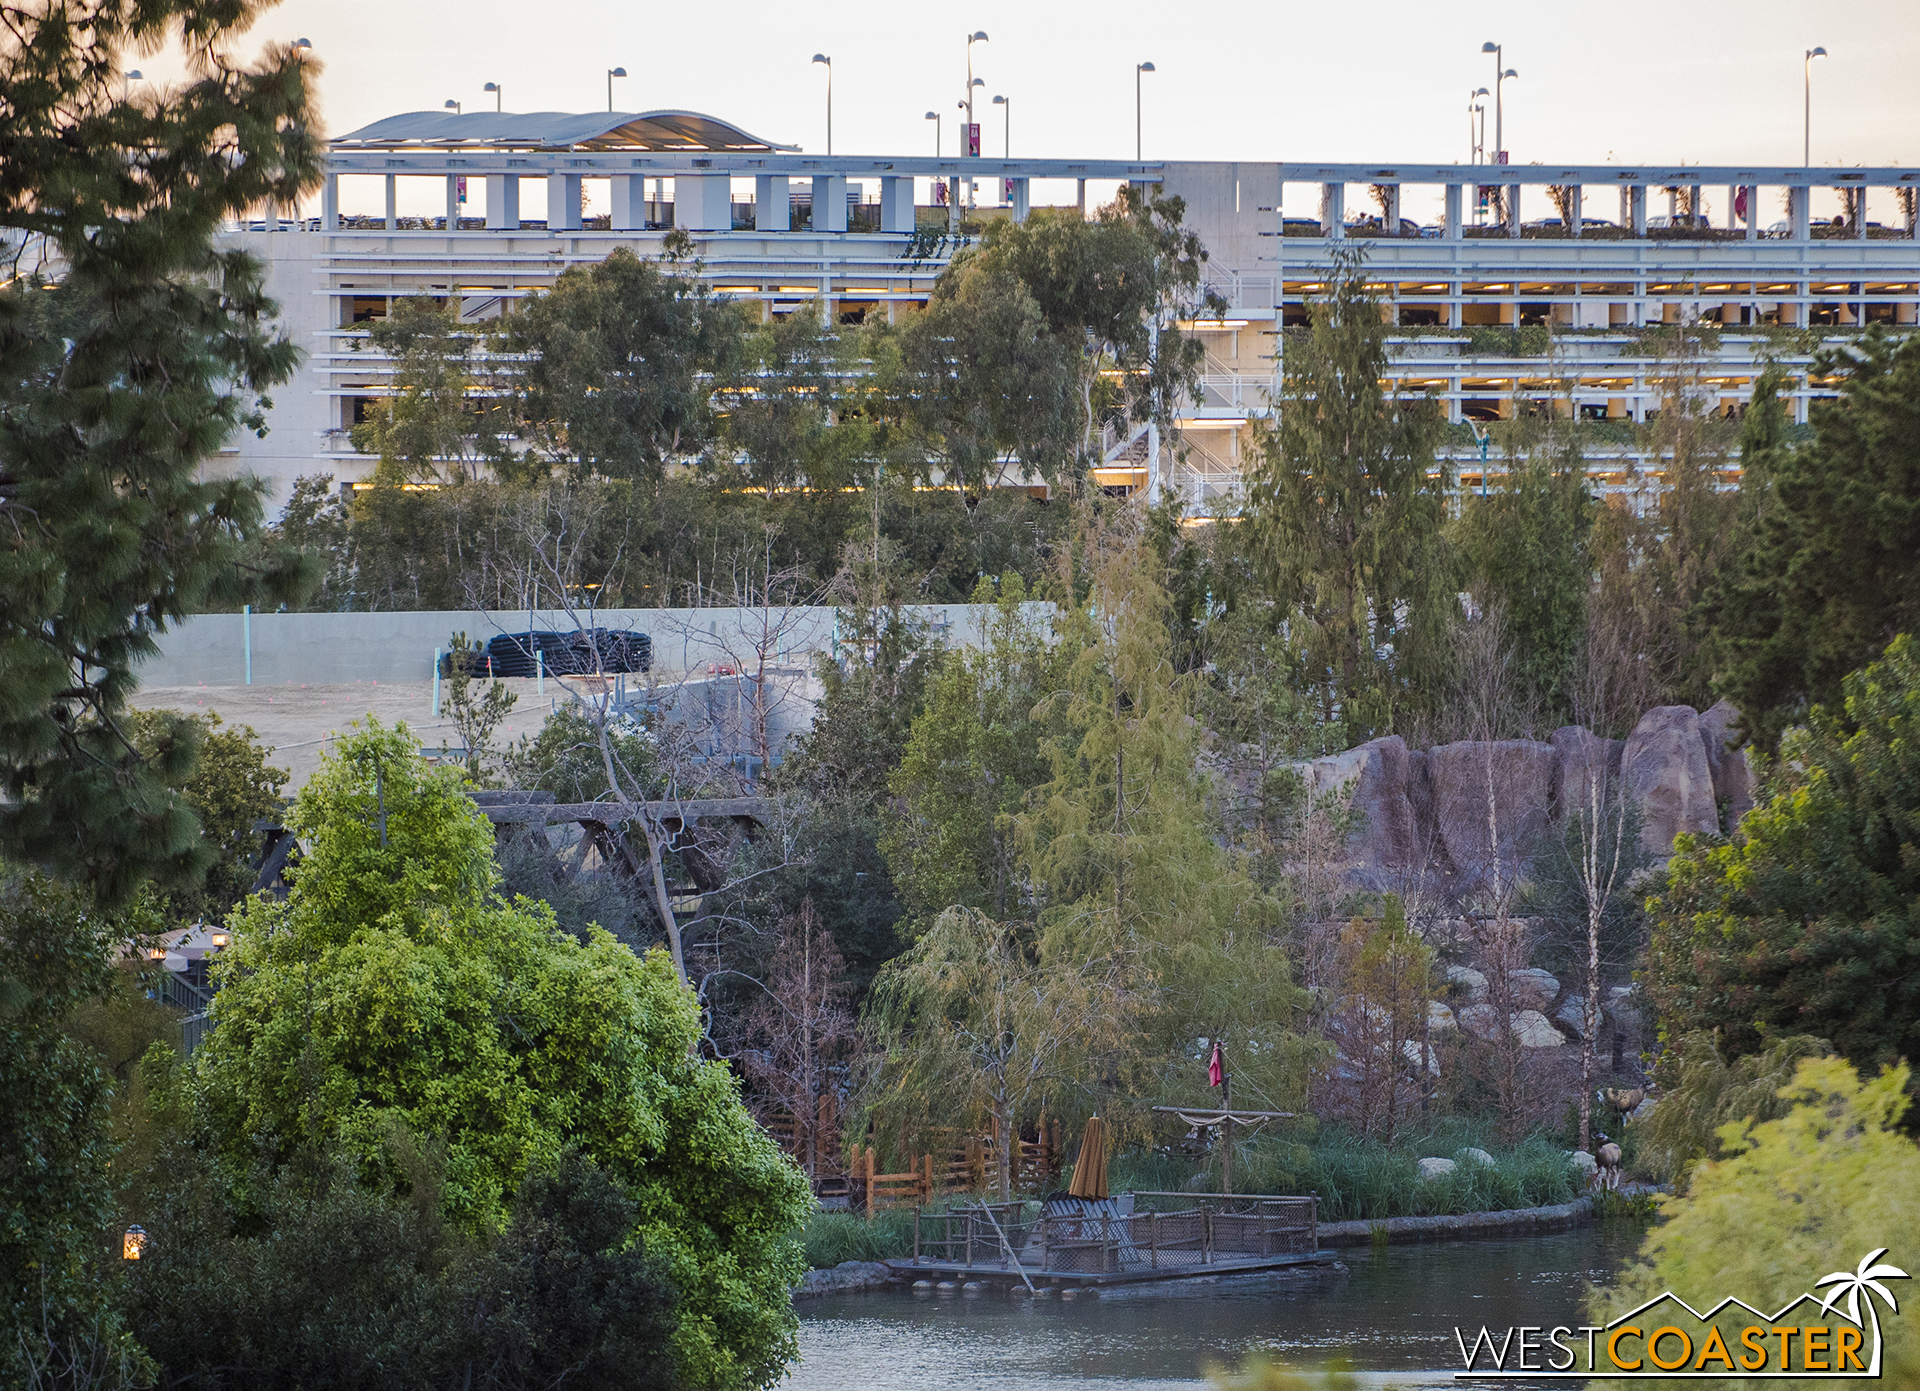  An oblique angle of the Critter Country side of Galaxy's Edge. 